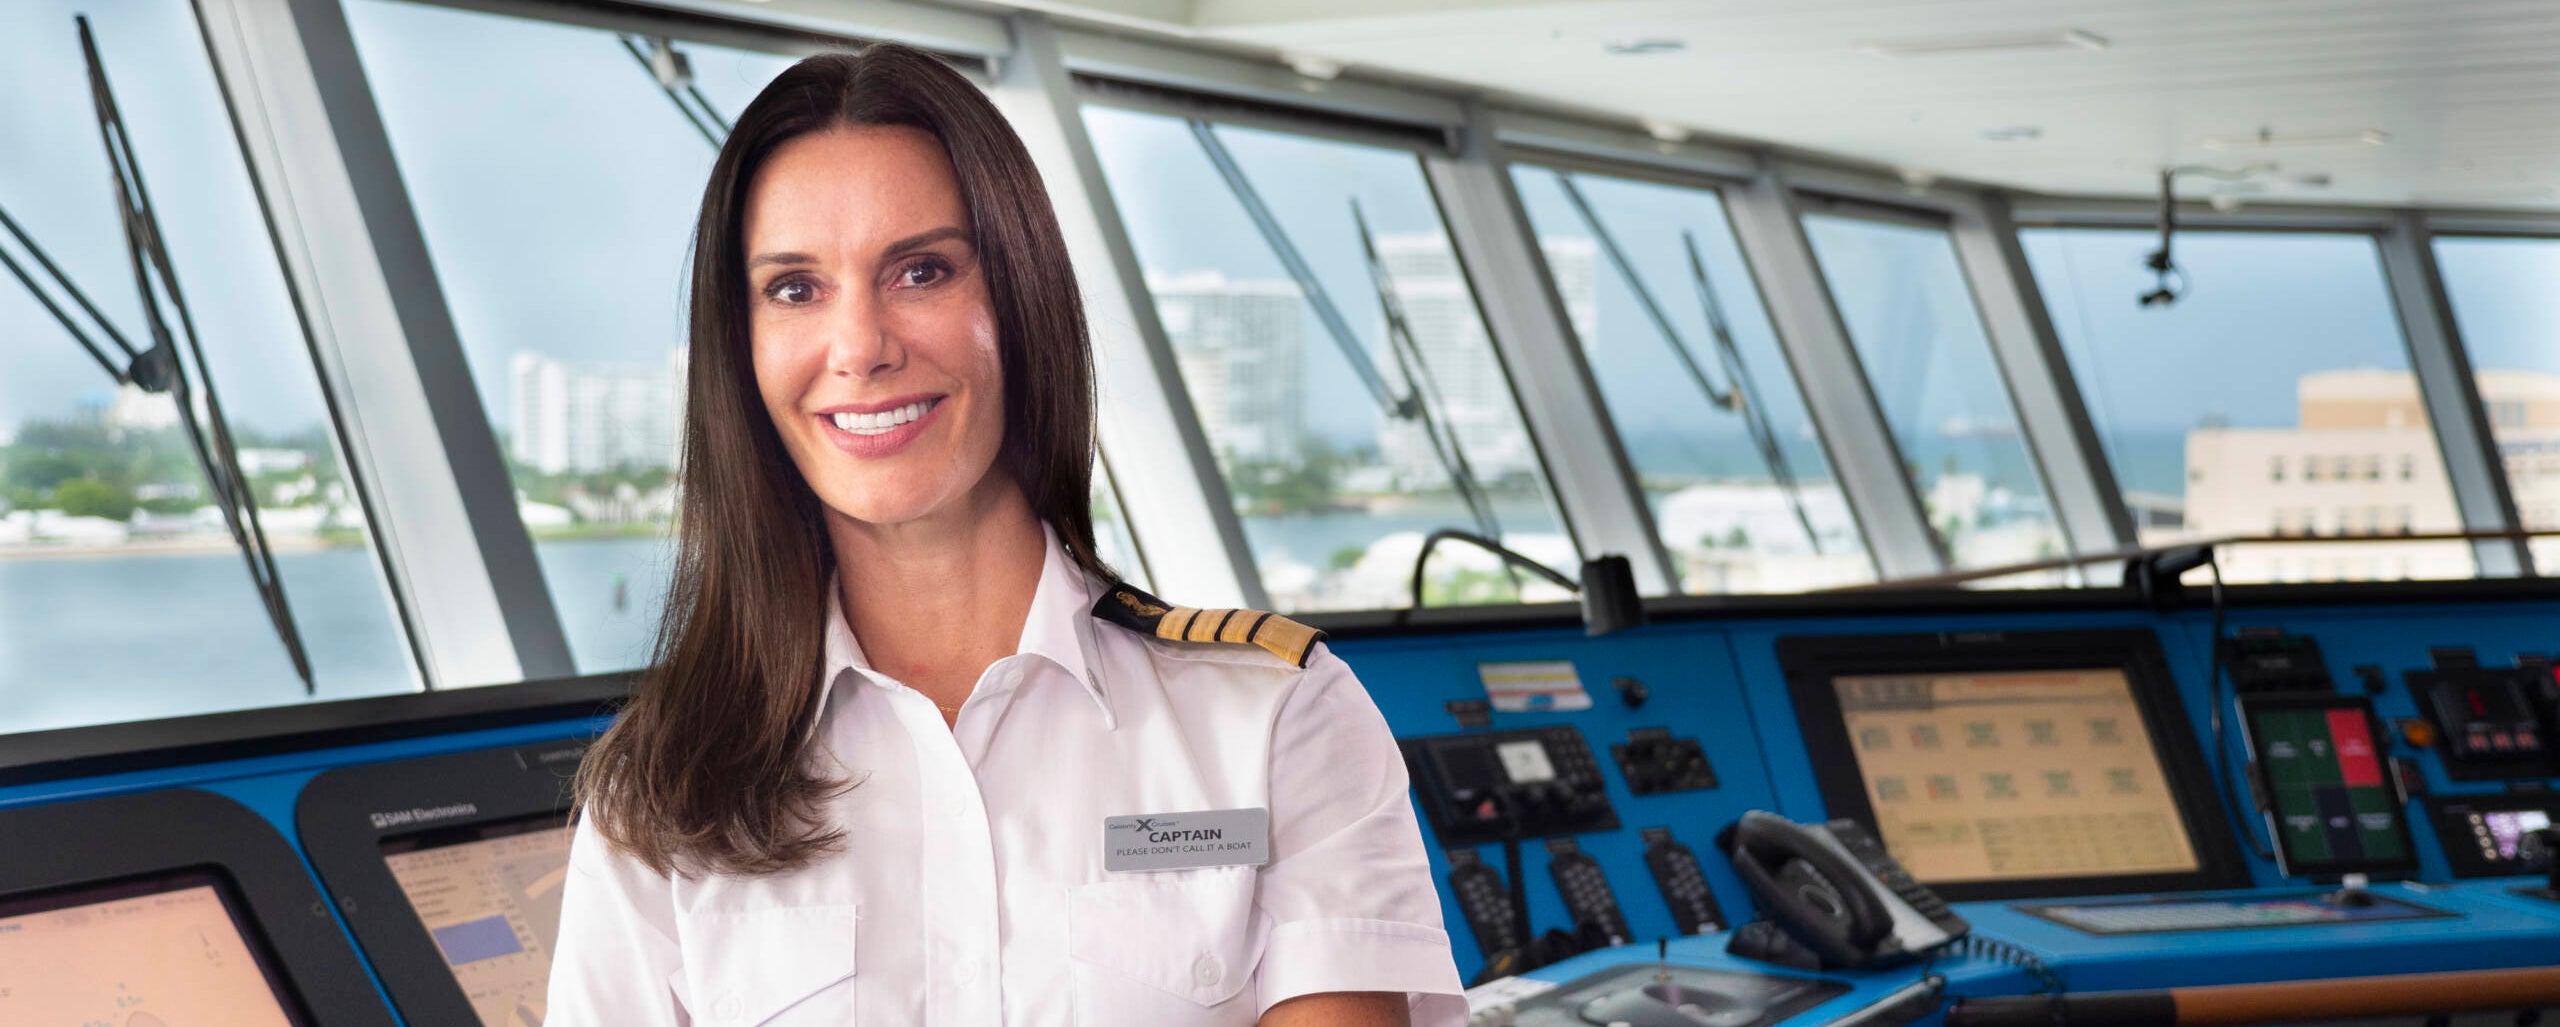 The First American Woman To Captain A Cruise Ship Schools Internet Troll In Viral Video The